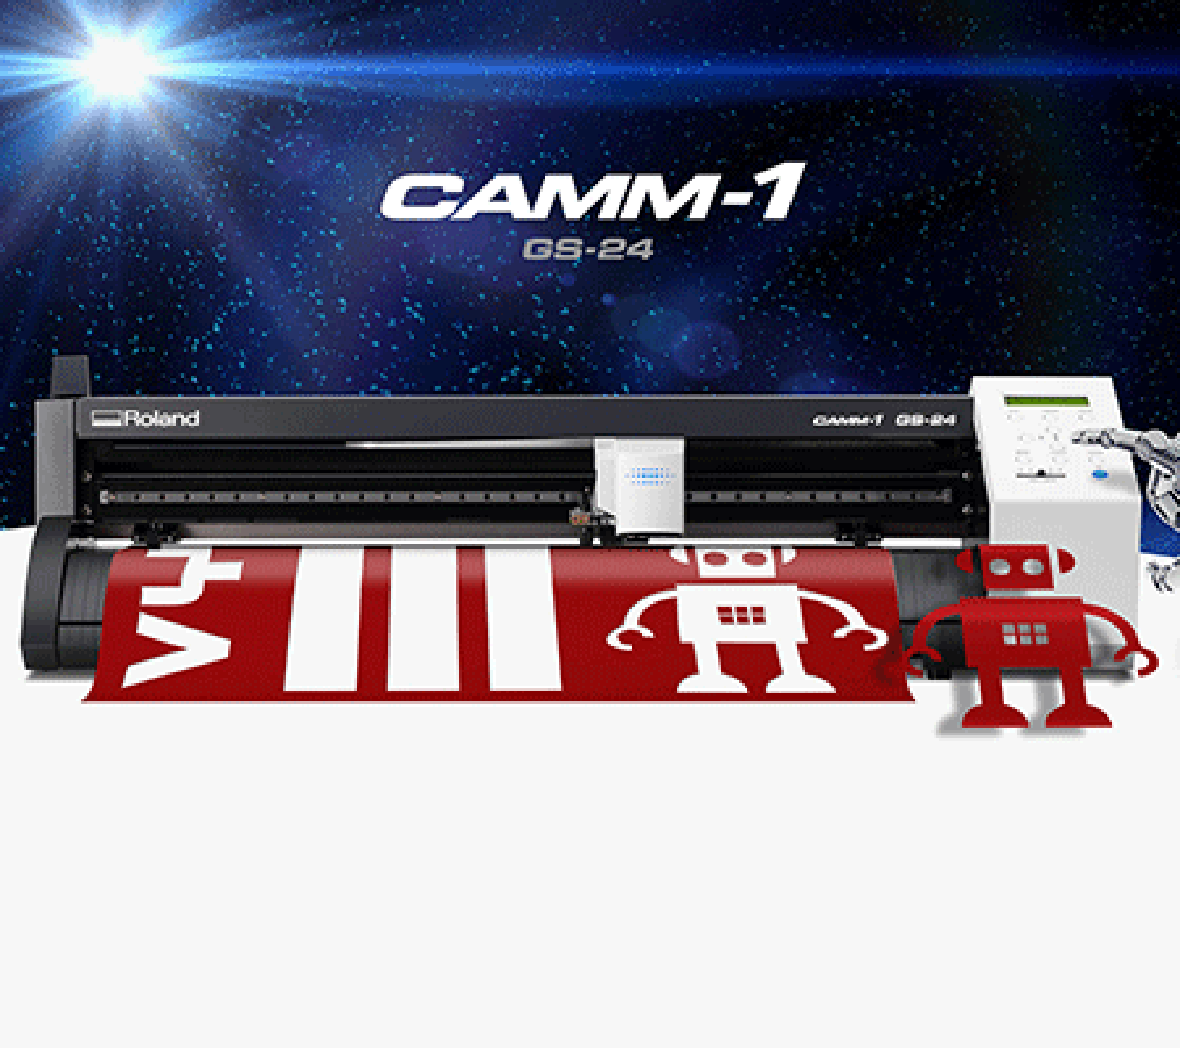 Roland CAMM-1 GS-24 cutting plotter Featured Image